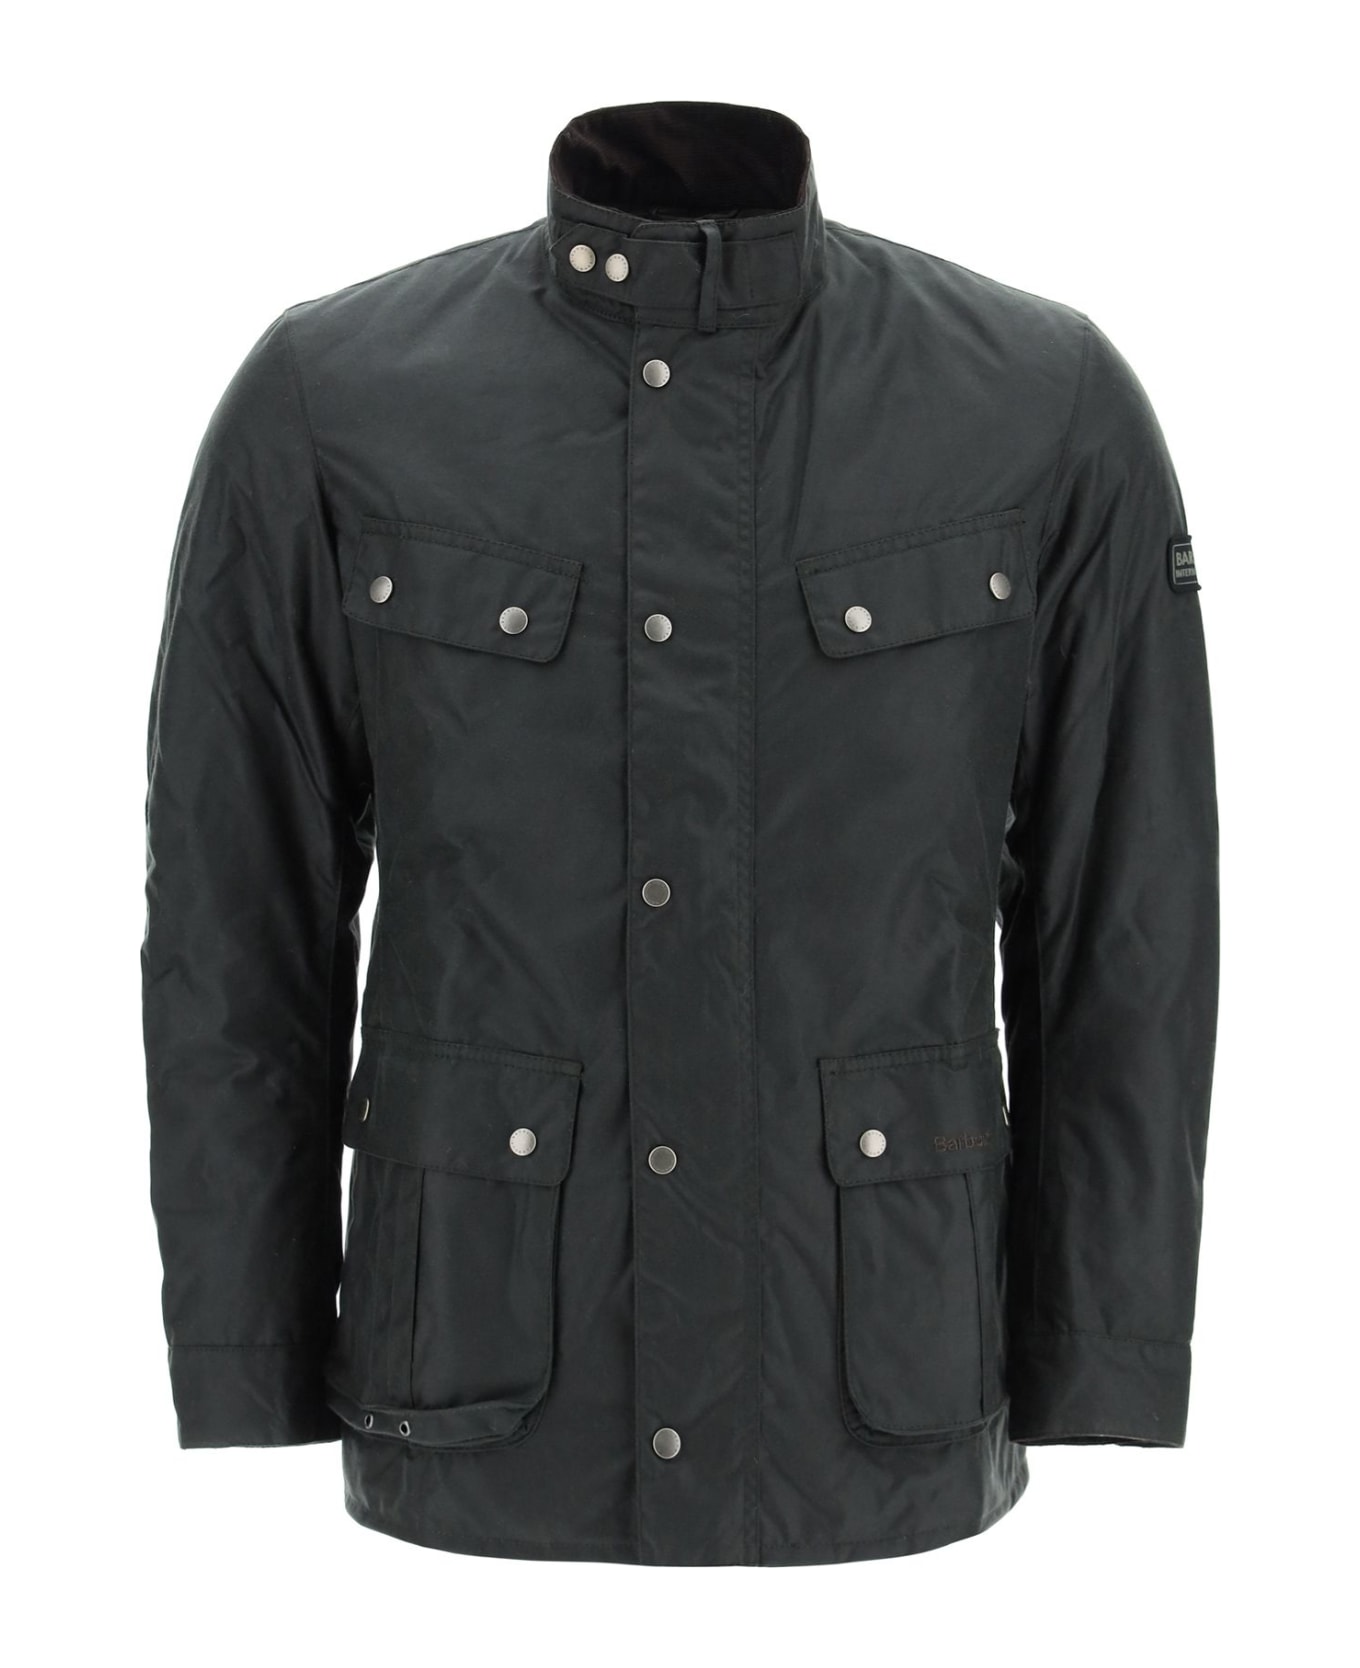 Barbour Duke Jacket In Waxed Cotton - SAGE (Green)